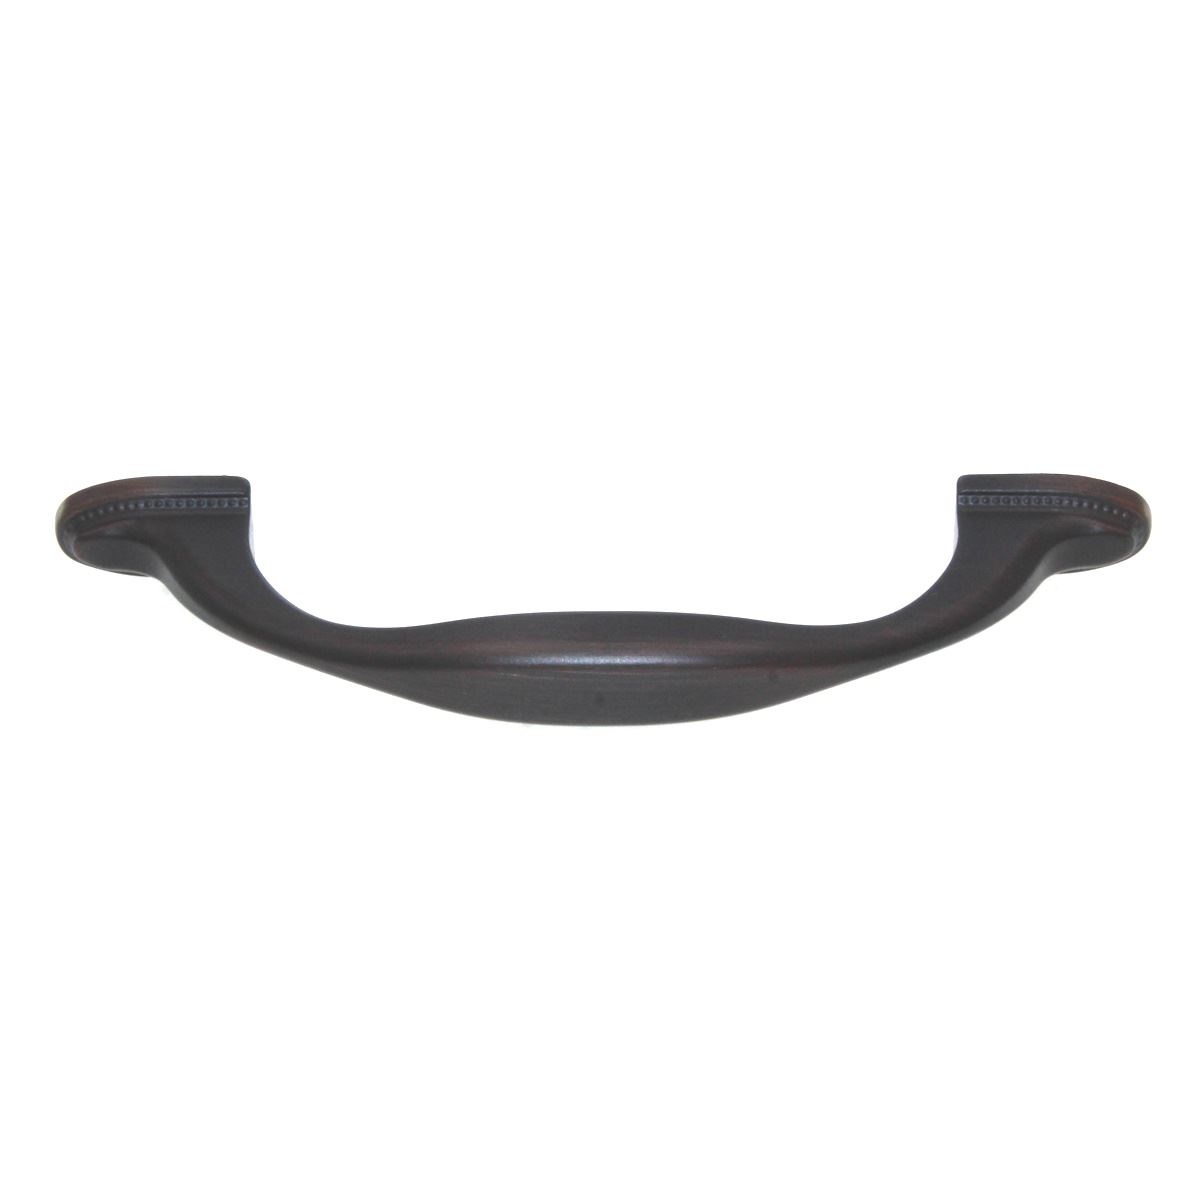 Amerock Atherly Cabinet Arch Pull 3" Ctr Oil-Rubbed Bronze BP29289ORB